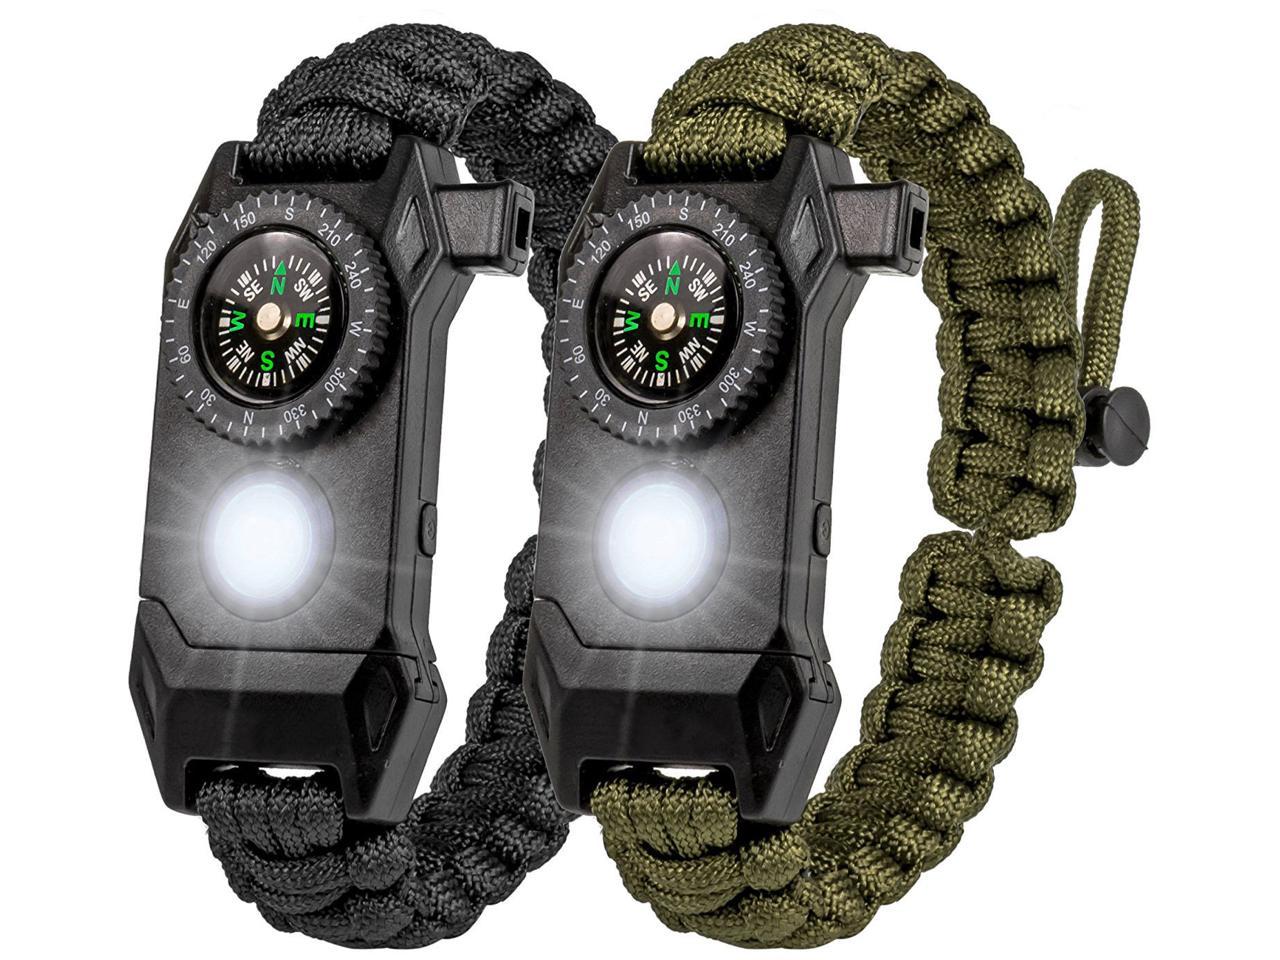 20 in 1 Emergency Survival Paracord Bracelet SOS LED Camouflage Compass